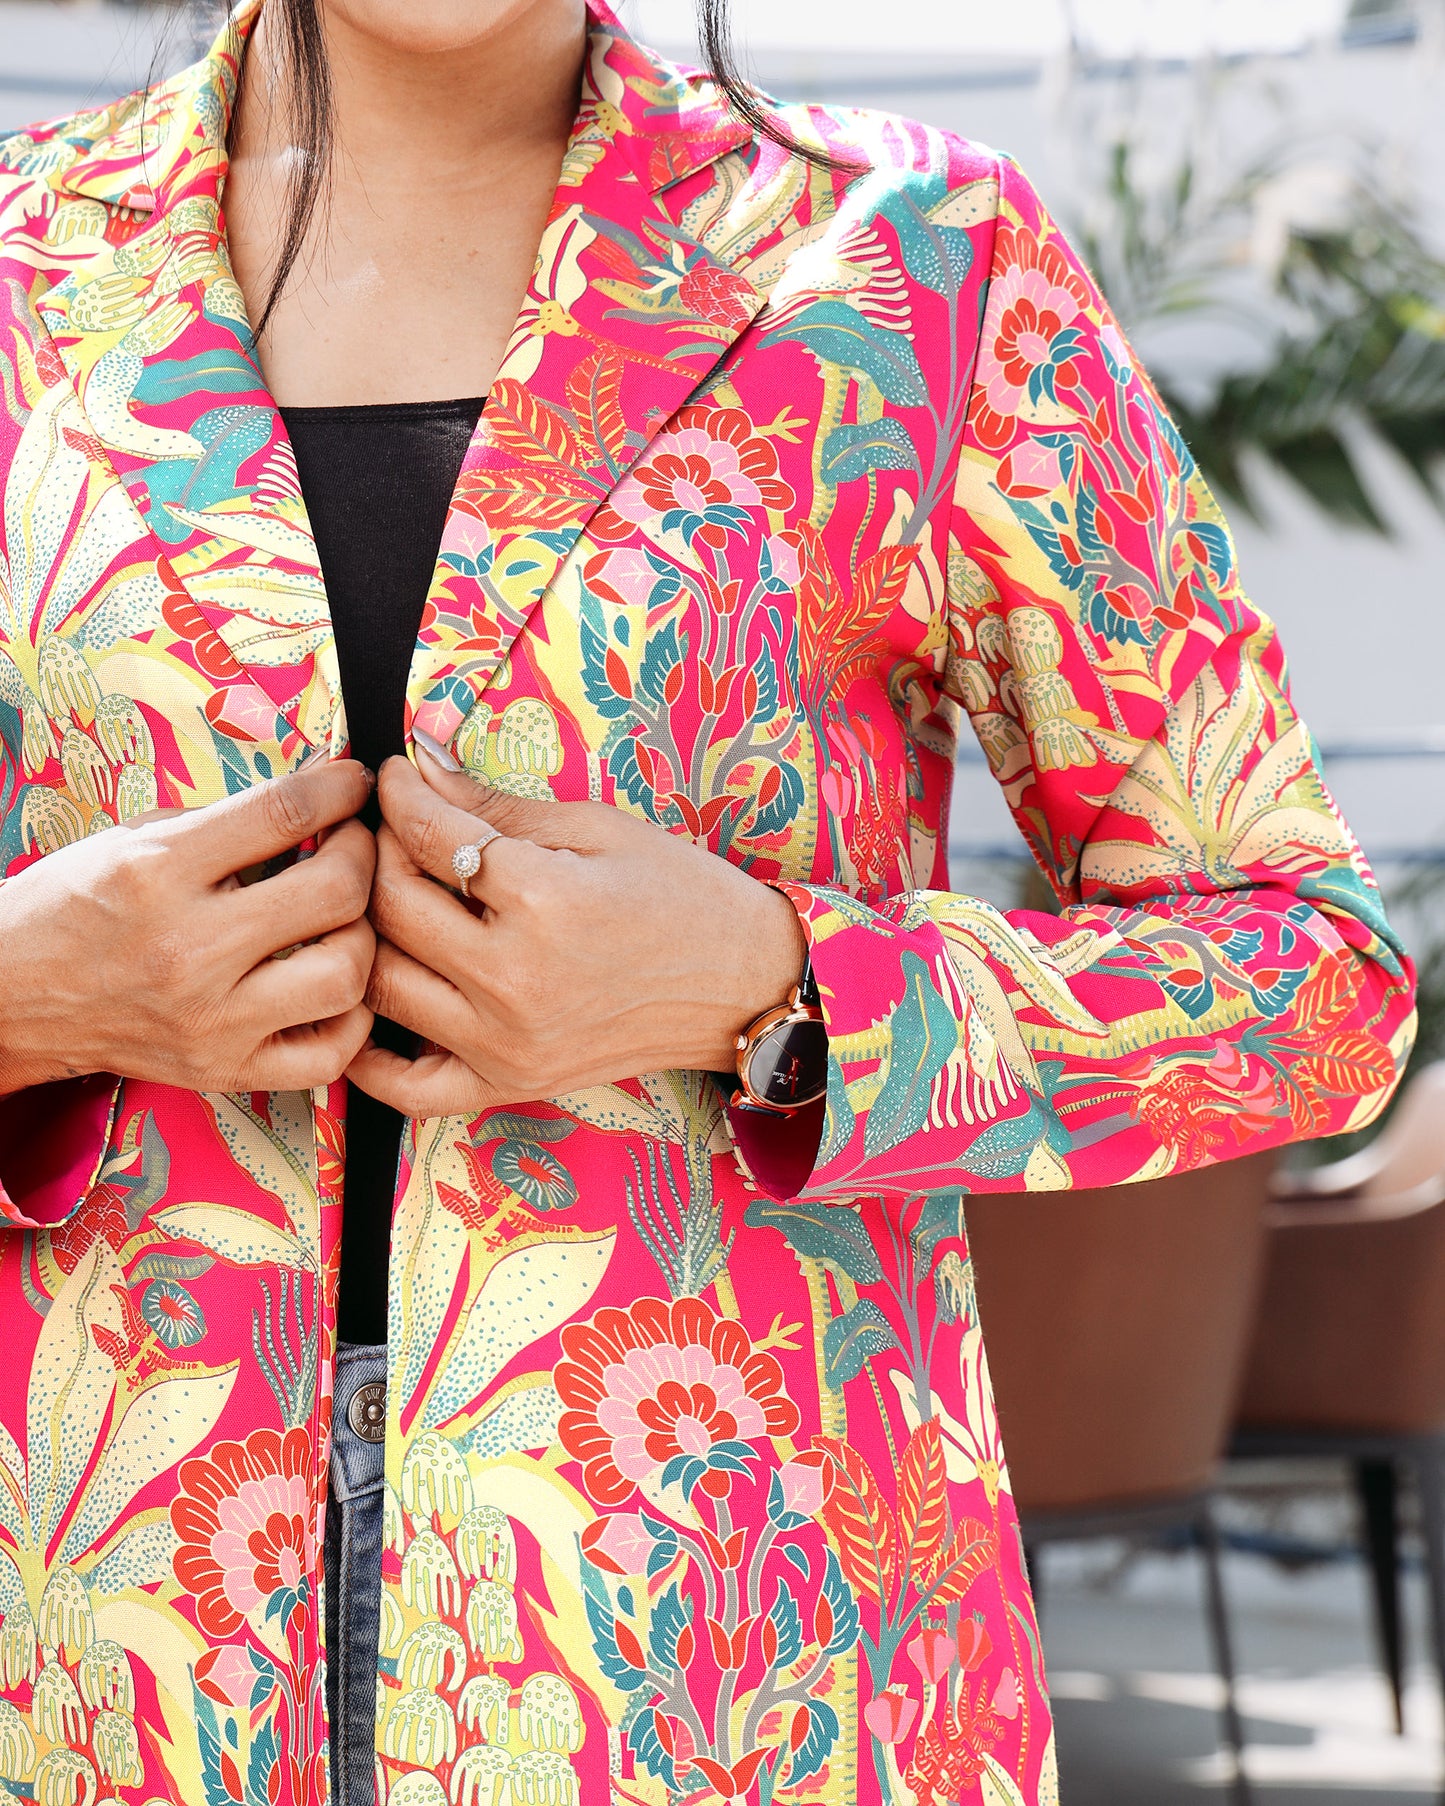 Crafted Chaos: Mismatched Masterpiece Jacket